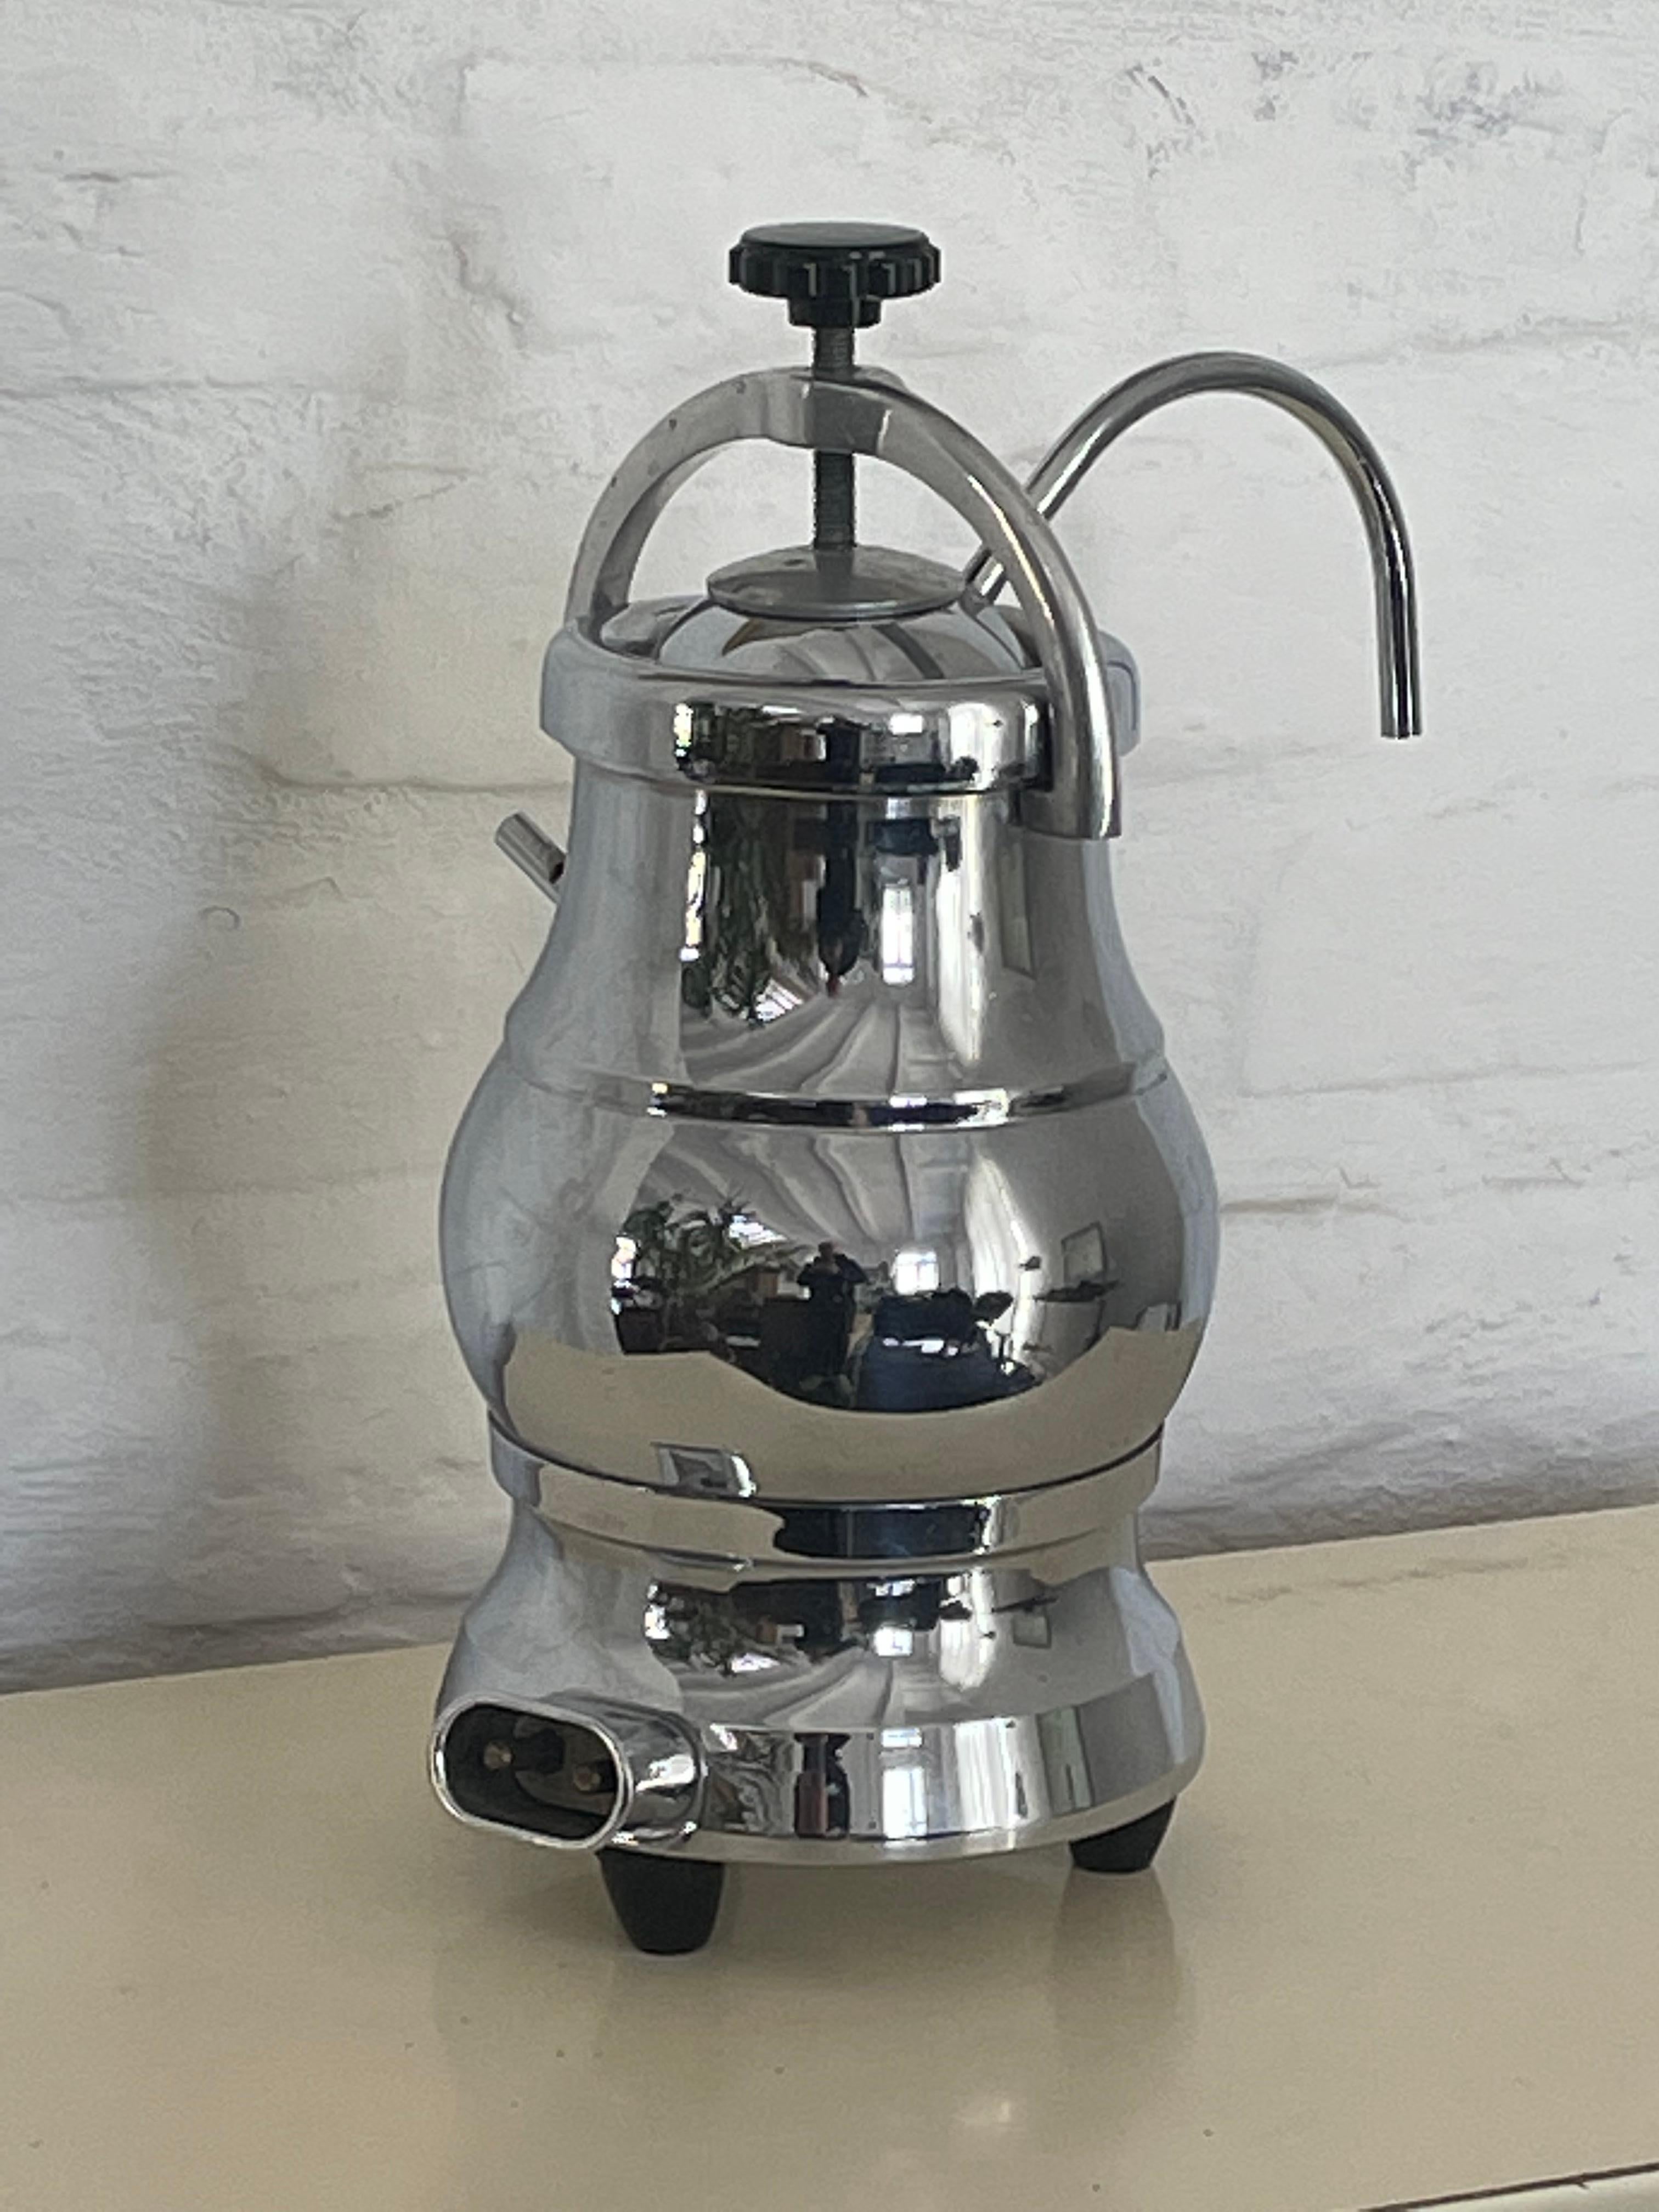 Unique and special electric coffee maker with steam pressure mechanism from the Bavaria brand Munich Germany from the first half of the 20th century.
 Chromed steel, Alu and Bakelite The water tank can be reached by unscrewing the upper knob. The